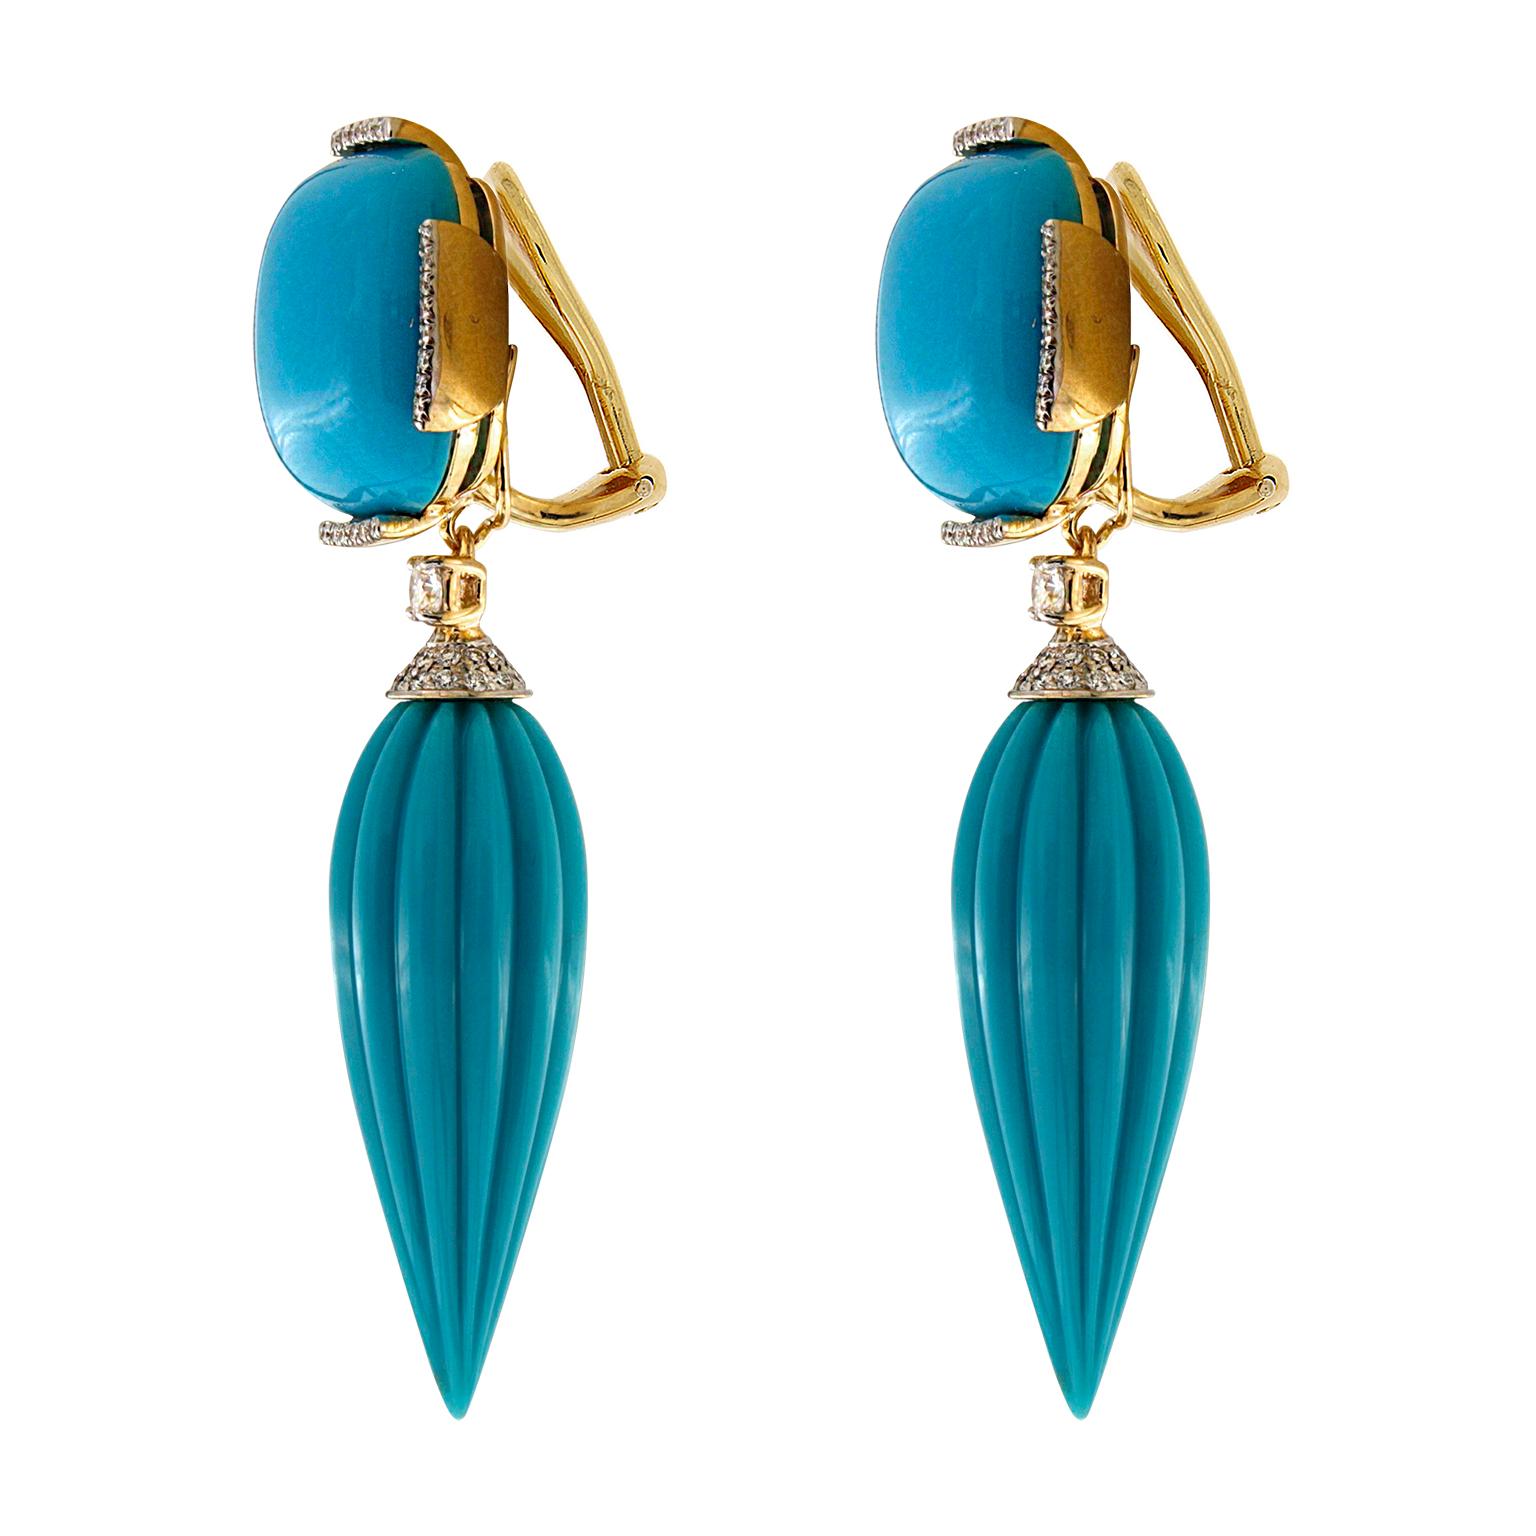 Blue and white enliven these drop earrings. Their foundation is 18k yellow gold, which displays a cushion shaped turquoise cabochon at the top. Bars studded with round brilliant cut diamonds edge the blue gemstone. Underneath hangs a fluted